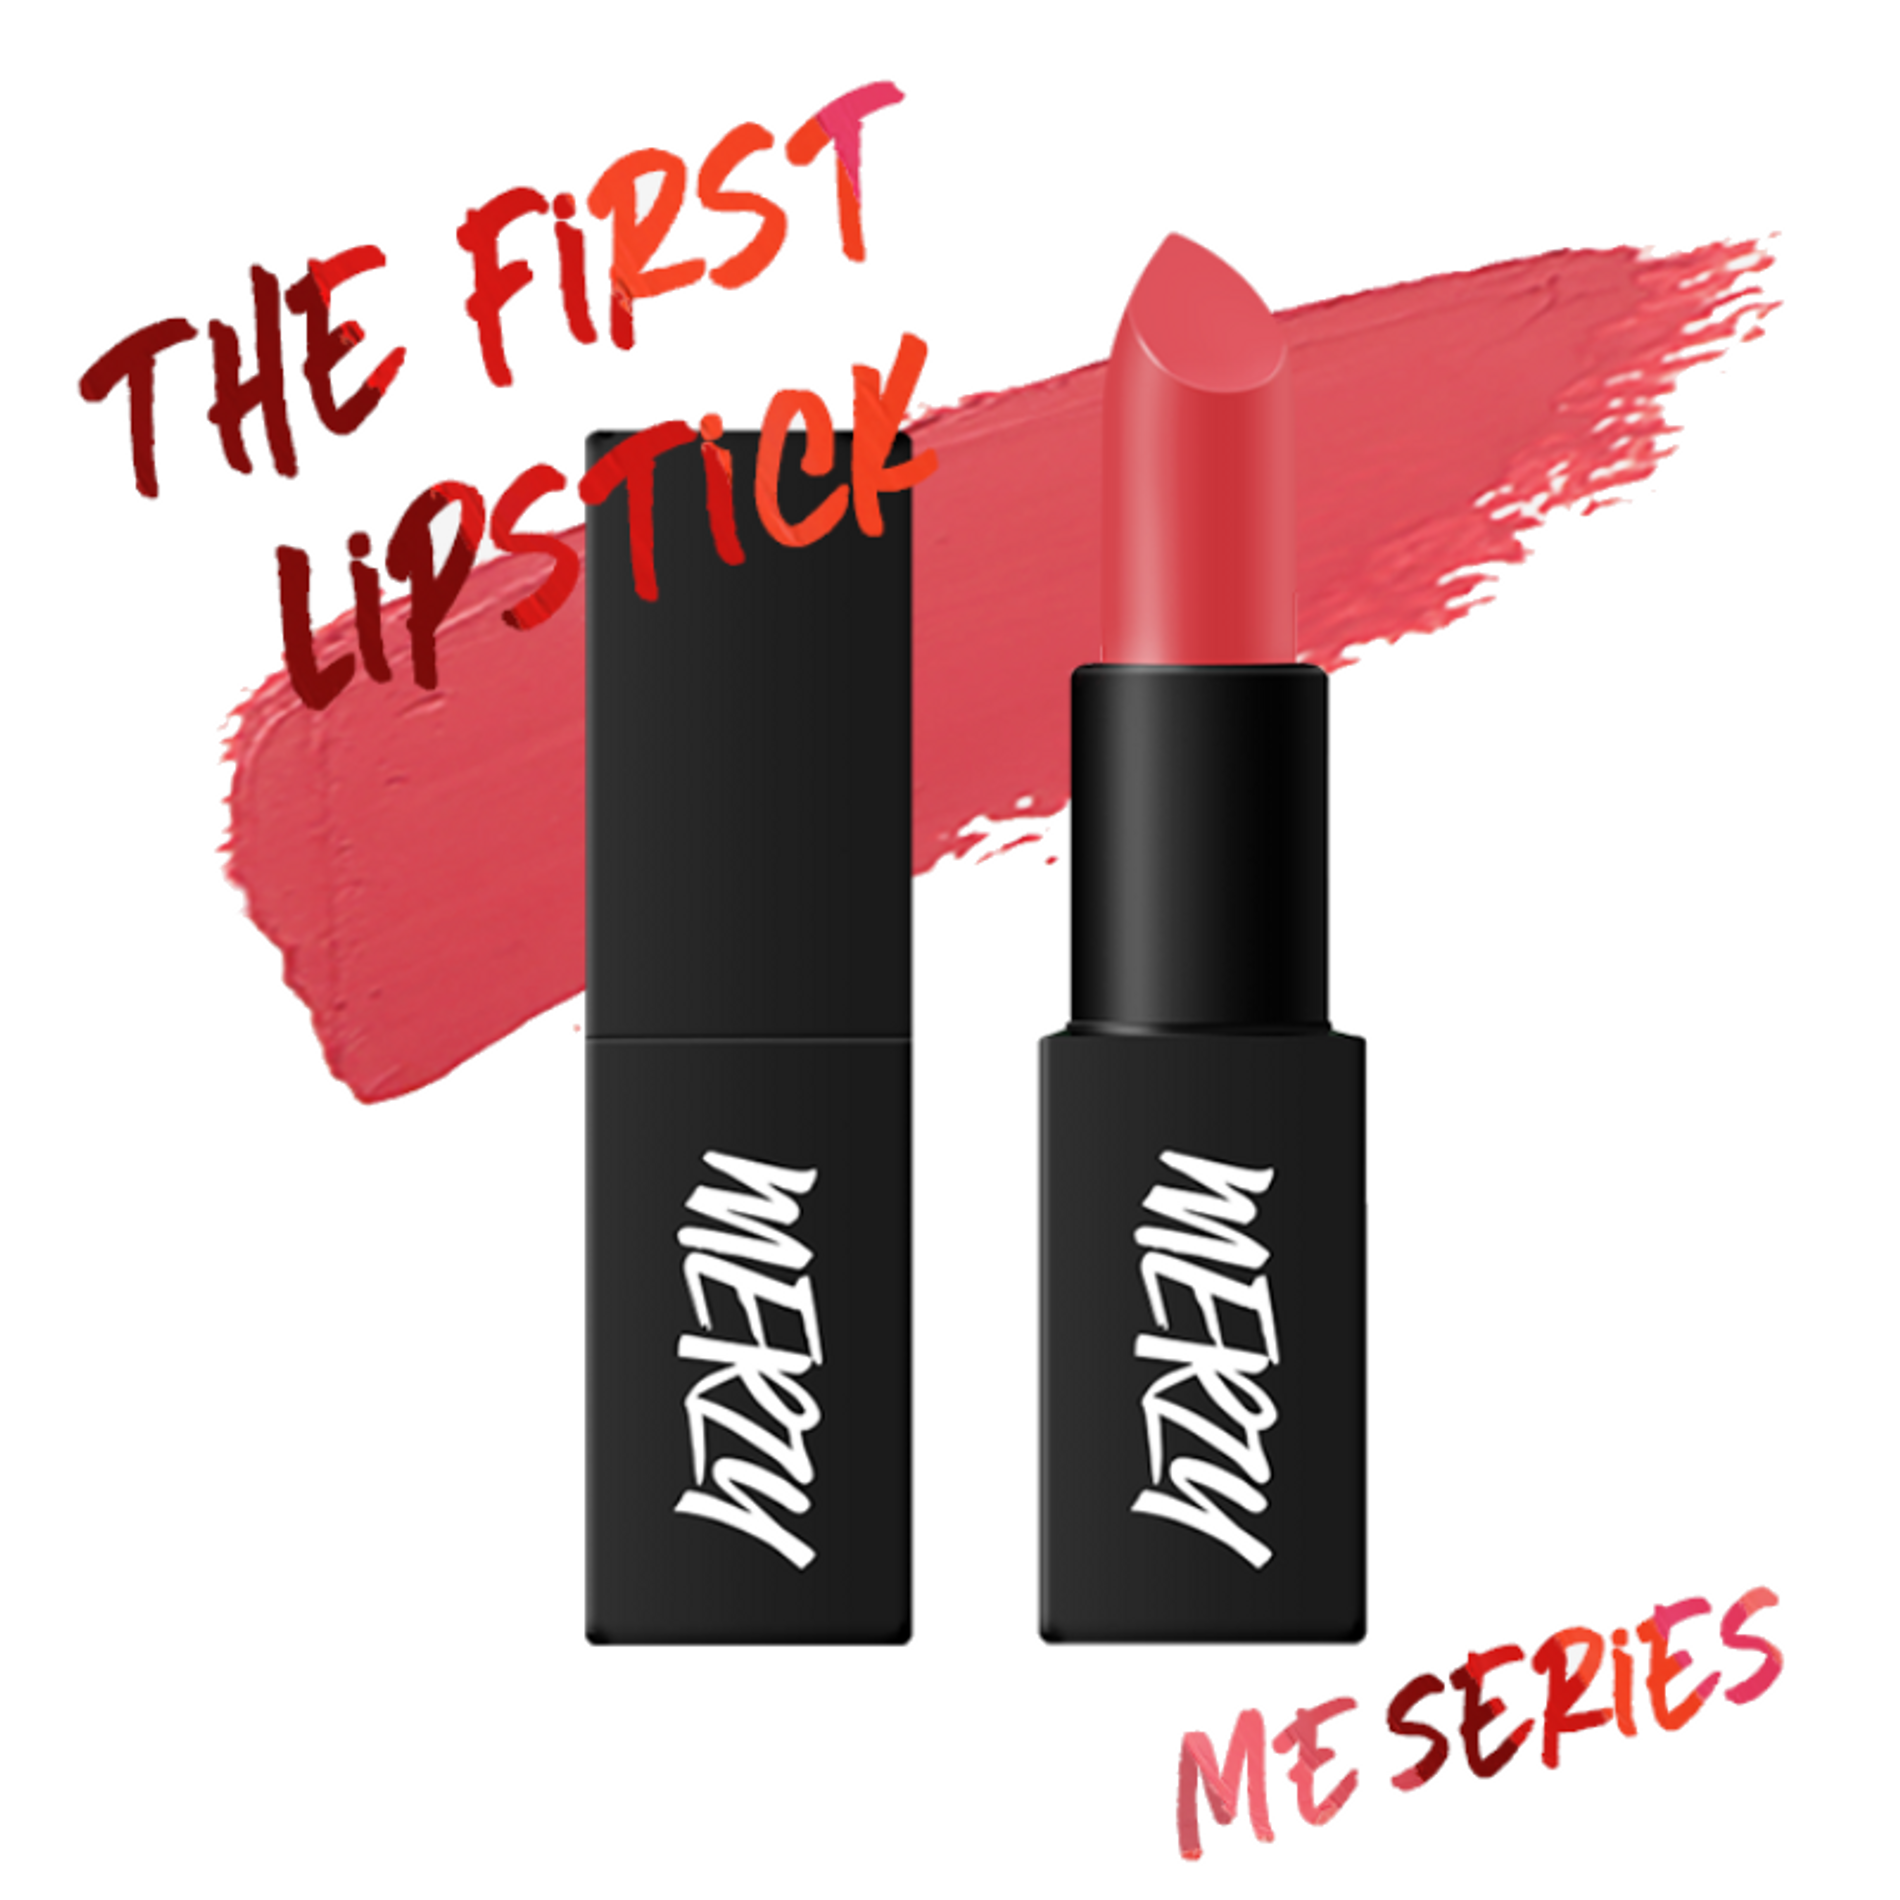 son-thoi-merzy-the-first-lipstick-3-5g-me-series-16